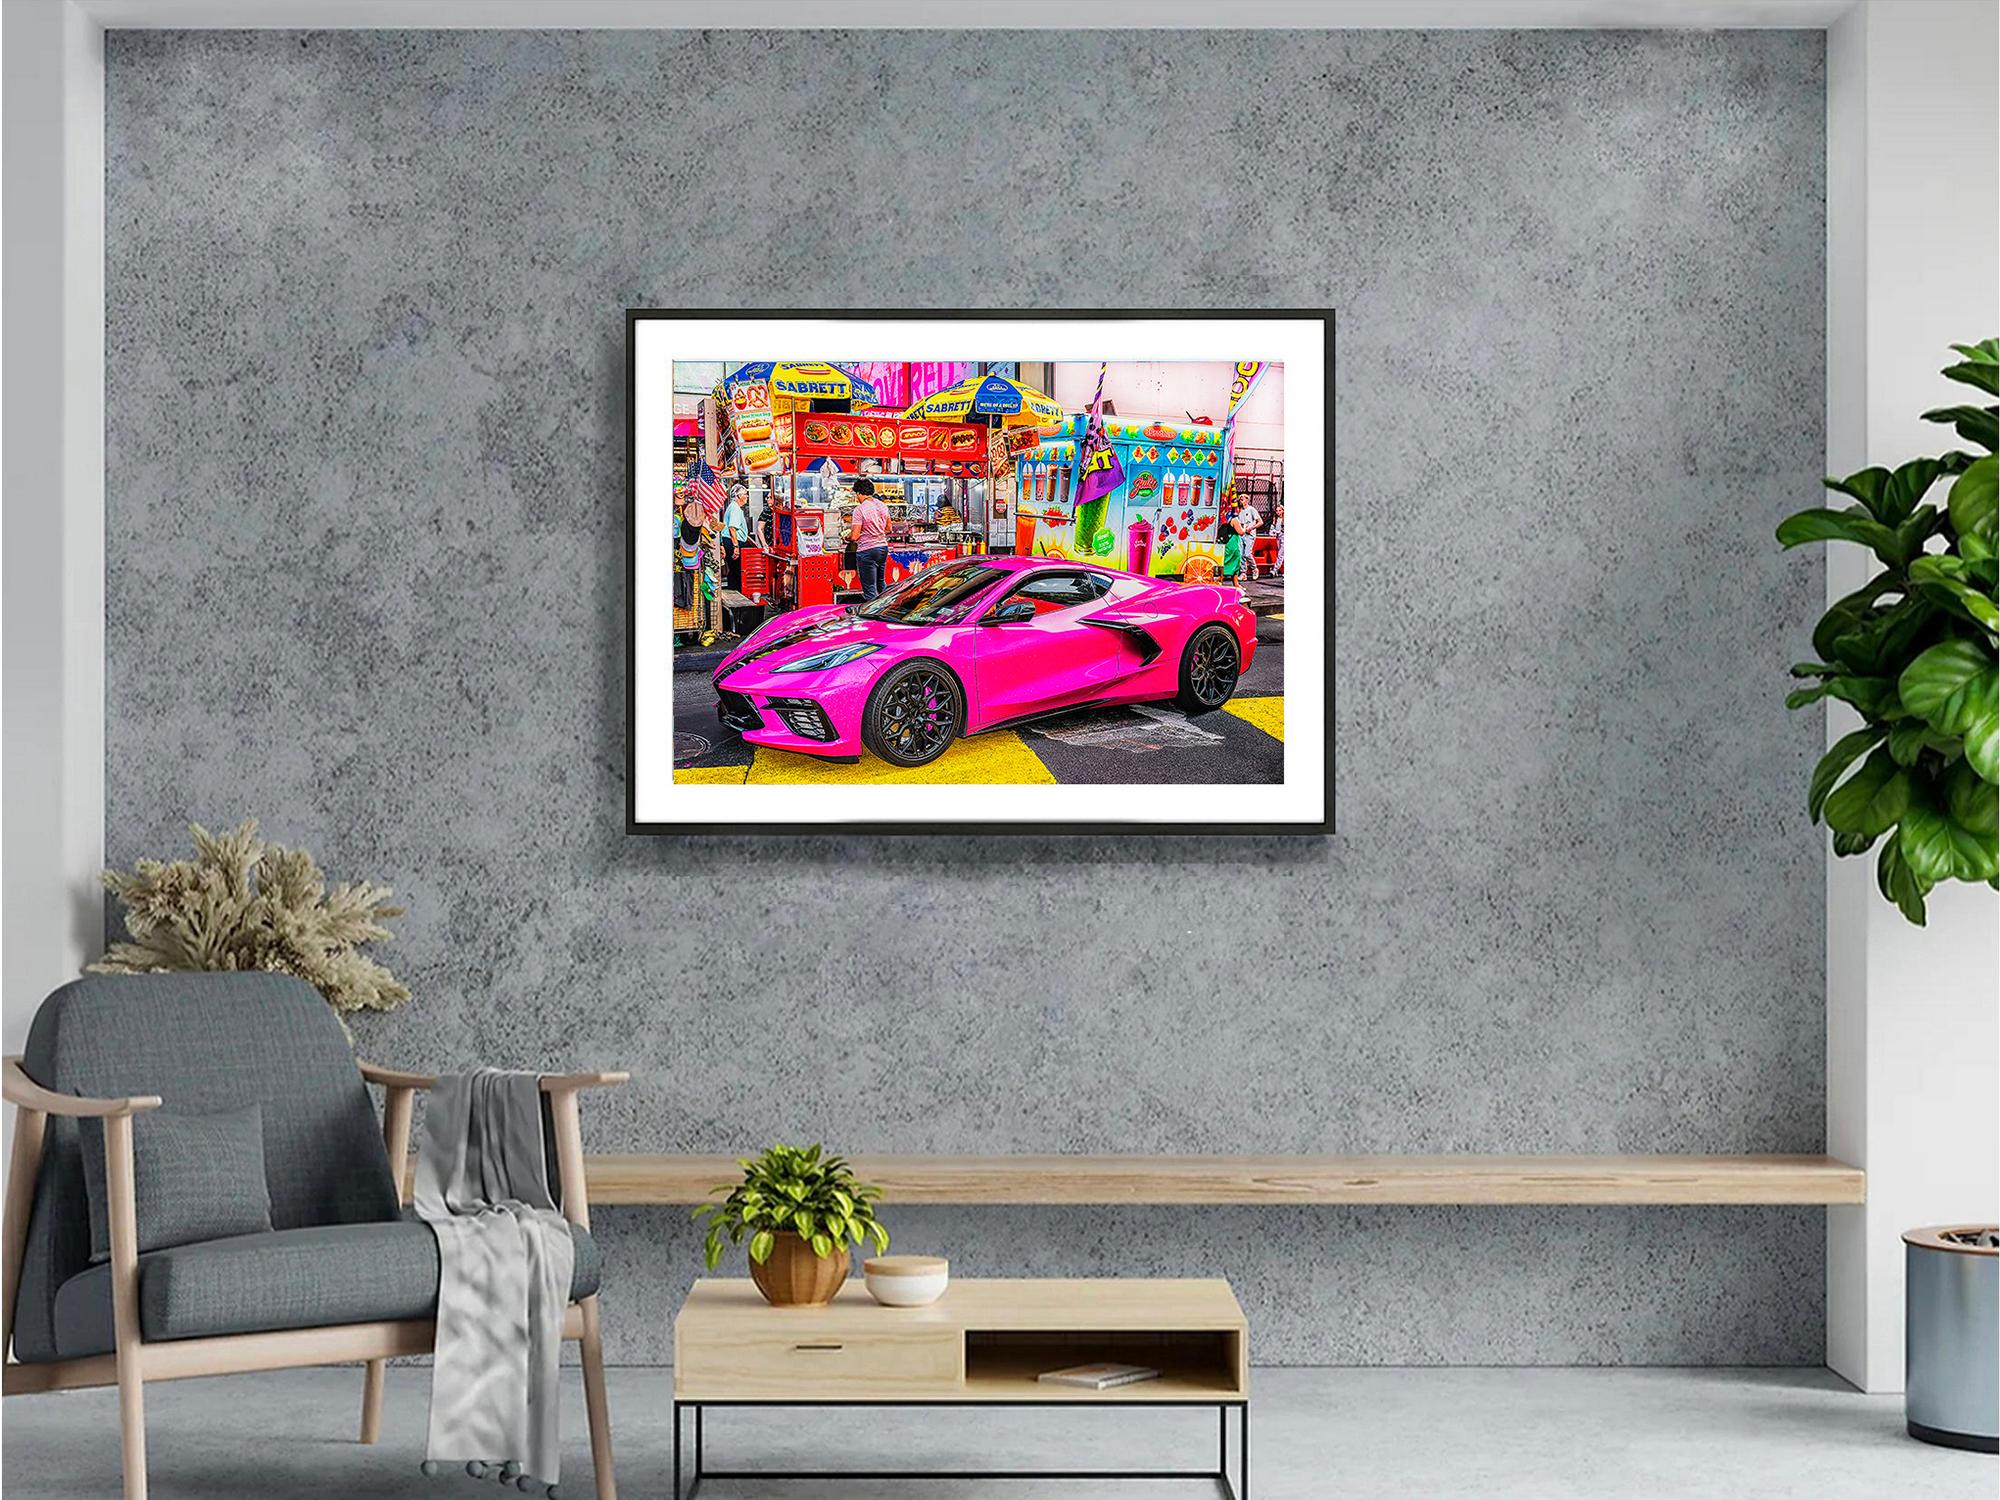 Hot Pink Hot Car in Times Square  - Automotive - Contemporary Photograph by Mitchell Funk